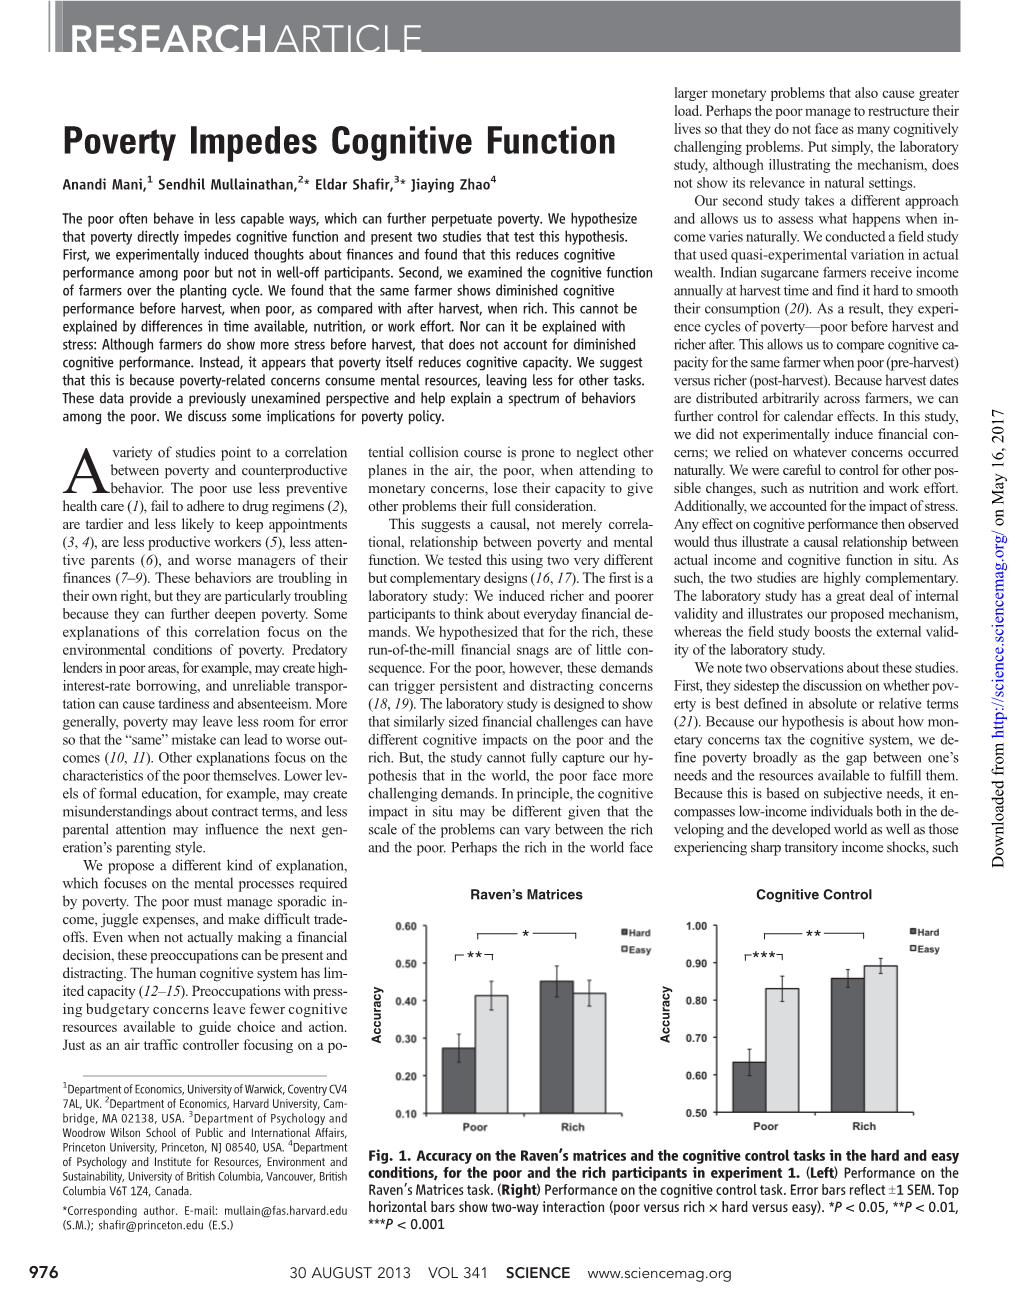 Poverty Impedes Cognitive Function RESEARCHARTICLE